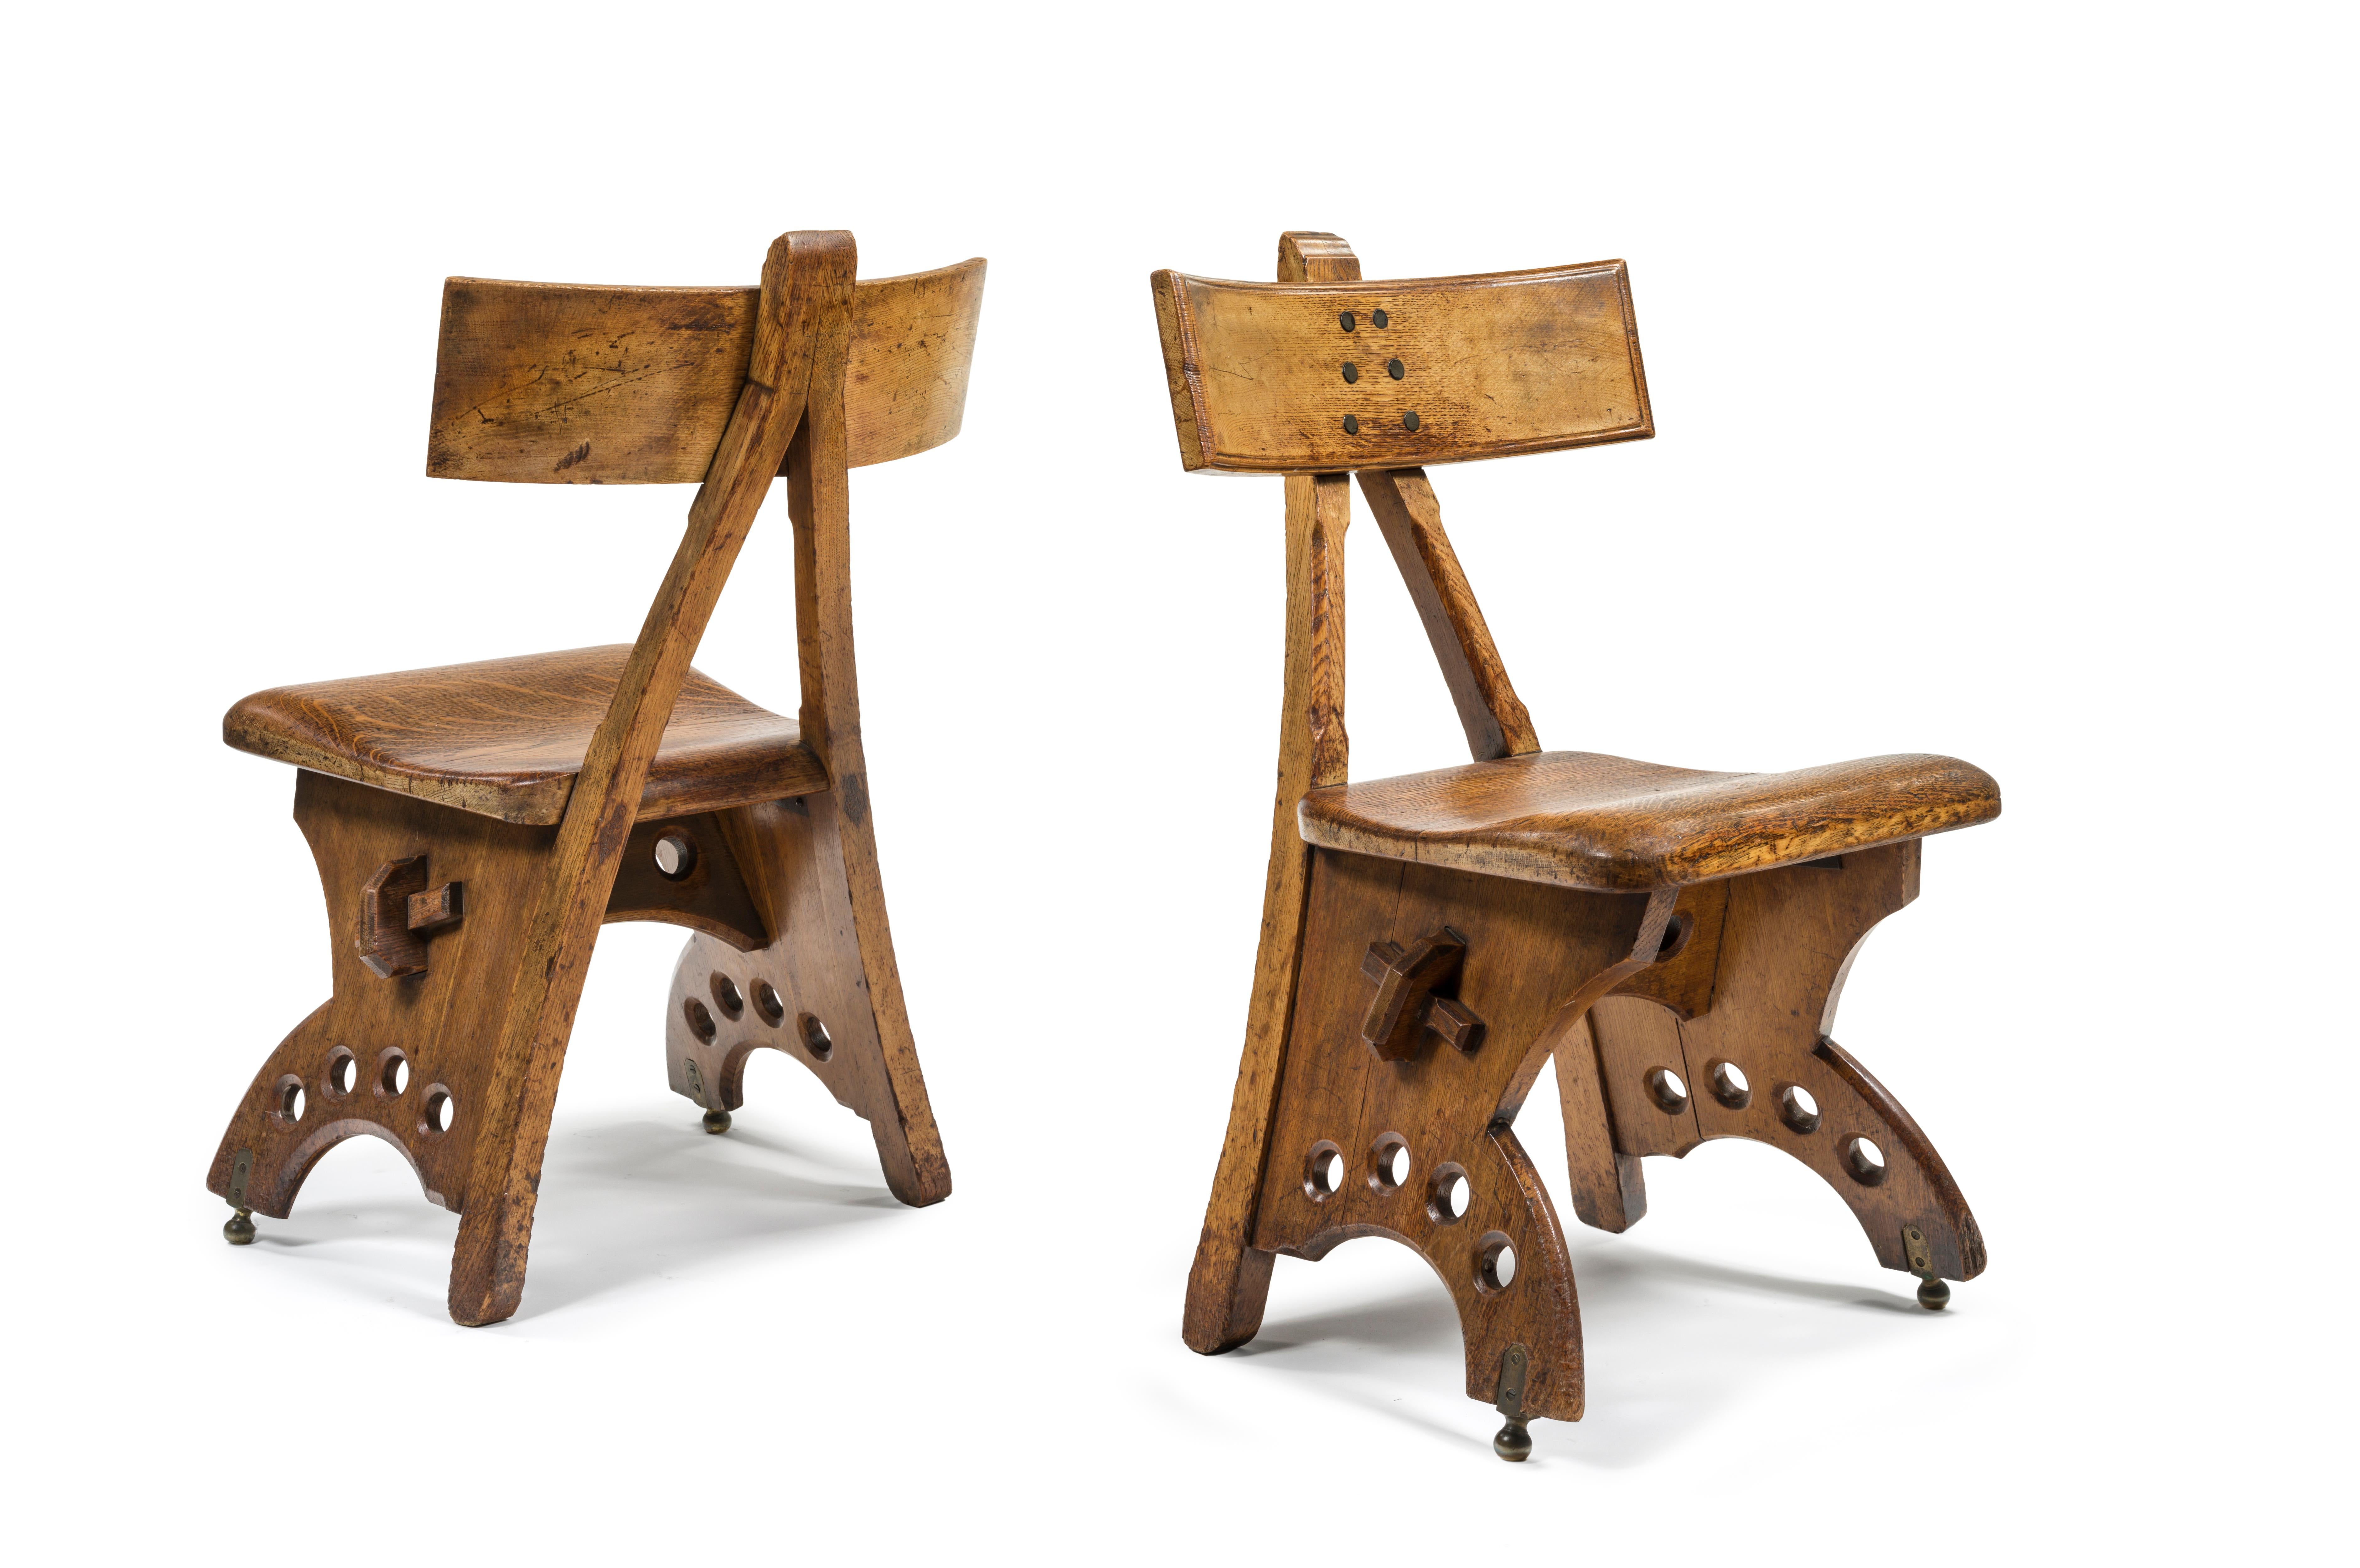 Edward Welby Pugin, 1834-1875
Set of four Granville chairs, light stain 1870
Solid oak.
Base stamped 4; Registration mark : 4th July 1868
Registration mark on some : II Class, 17th Oct 1870, Parcel N°1
From Granville Hotel, Ramsgate, built by